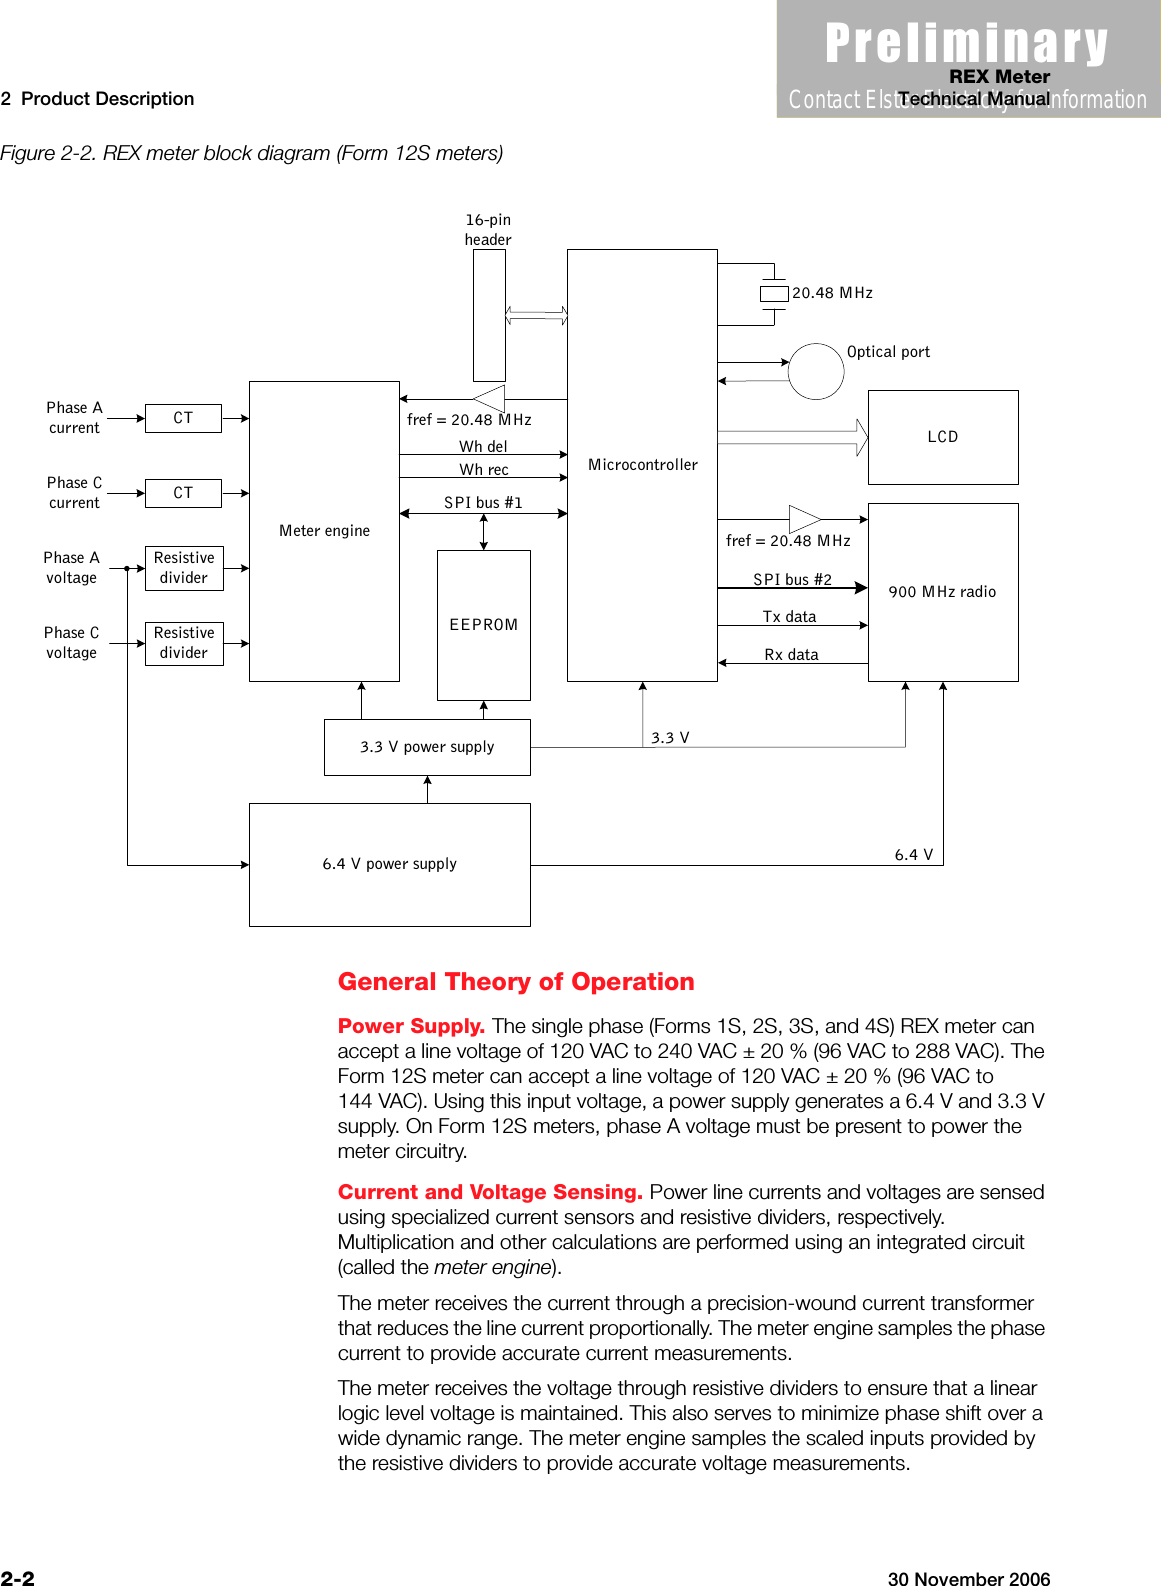 3UHOLPLQDU\Contact Elster Electricity for informationREX Meter2  Product Description Technical Manual2-2 30 November 2006Figure 2-2. REX meter block diagram (Form 12S meters)General Theory of OperationPower Supply. The single phase (Forms 1S, 2S, 3S, and 4S) REX meter can accept a line voltage of 120 VAC to 240 VAC ± 20 % (96 VAC to 288 VAC). The Form 12S meter can accept a line voltage of 120 VAC ± 20 % (96 VAC to 144 VAC). Using this input voltage, a power supply generates a 6.4 V and 3.3 V supply. On Form 12S meters, phase A voltage must be present to power the meter circuitry.Current and Voltage Sensing. Power line currents and voltages are sensed using specialized current sensors and resistive dividers, respectively. Multiplication and other calculations are performed using an integrated circuit (called the meter engine). The meter receives the current through a precision-wound current transformer that reduces the line current proportionally. The meter engine samples the phase current to provide accurate current measurements.The meter receives the voltage through resistive dividers to ensure that a linear logic level voltage is maintained. This also serves to minimize phase shift over a wide dynamic range. The meter engine samples the scaled inputs provided by the resistive dividers to provide accurate voltage measurements.Meter engineEEPROMMicrocontrollerLCD900 MHz radio6.4 V power supply3.3 V power supply 3.3 V16-pinheaderOptical port20.48 MHzCTPhase AcurrentResistivedividerPhase Cvoltage6.4 VSPI bus #1Wh recWh delfref = 20.48 MHzfref = 20.48 MHzSPI bus #2Tx dataRx dataCTPhase CcurrentResistivedividerPhase Avoltage